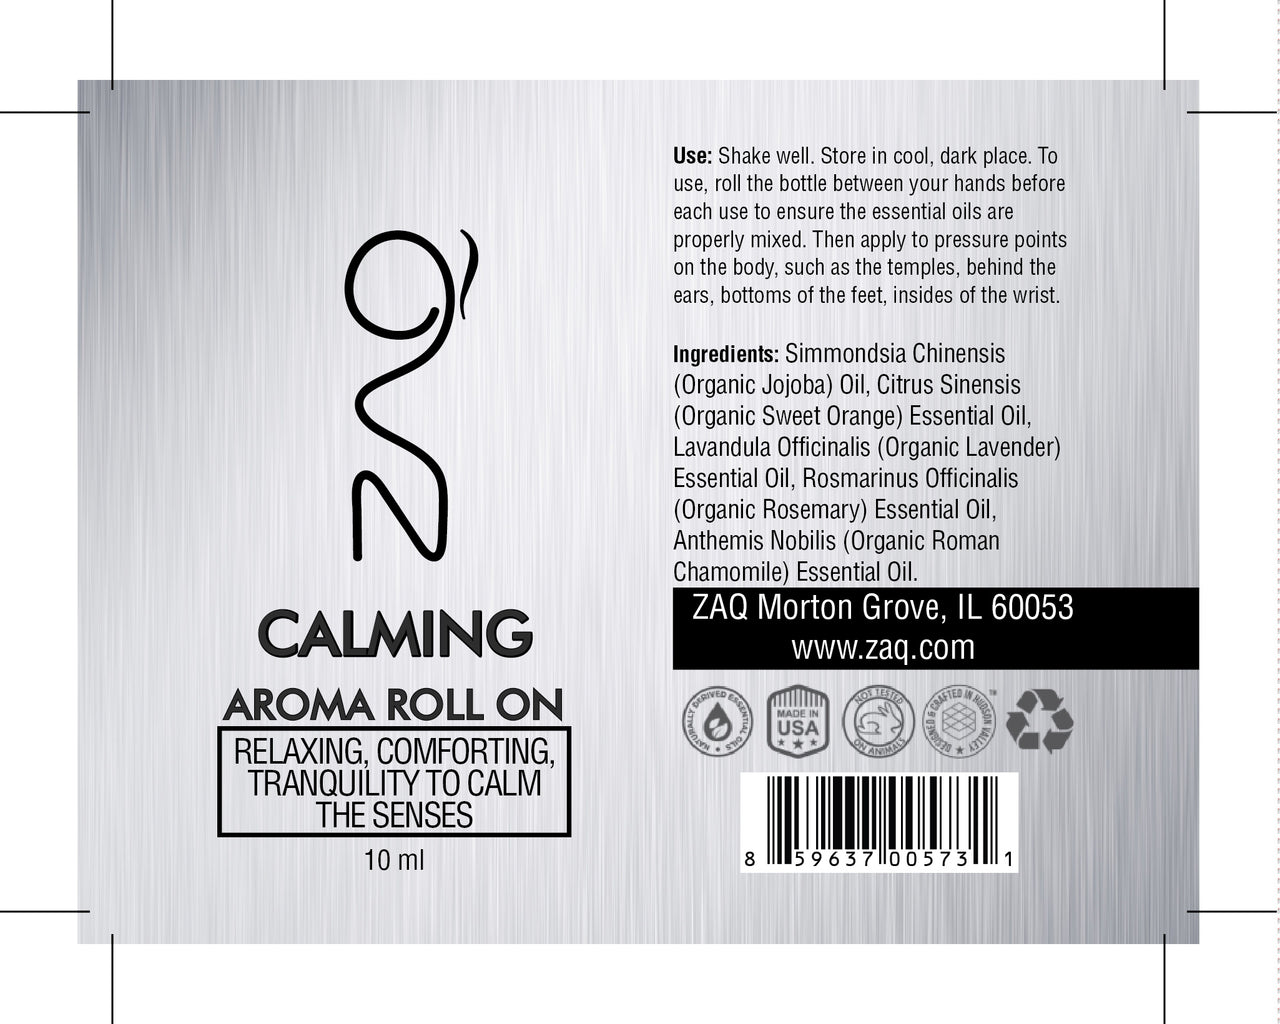 ZAQ Calming Aroma Essential Oil Roll On - Relaxing, Comforting, Tranquility to calm the senses - Popularelectronics.com